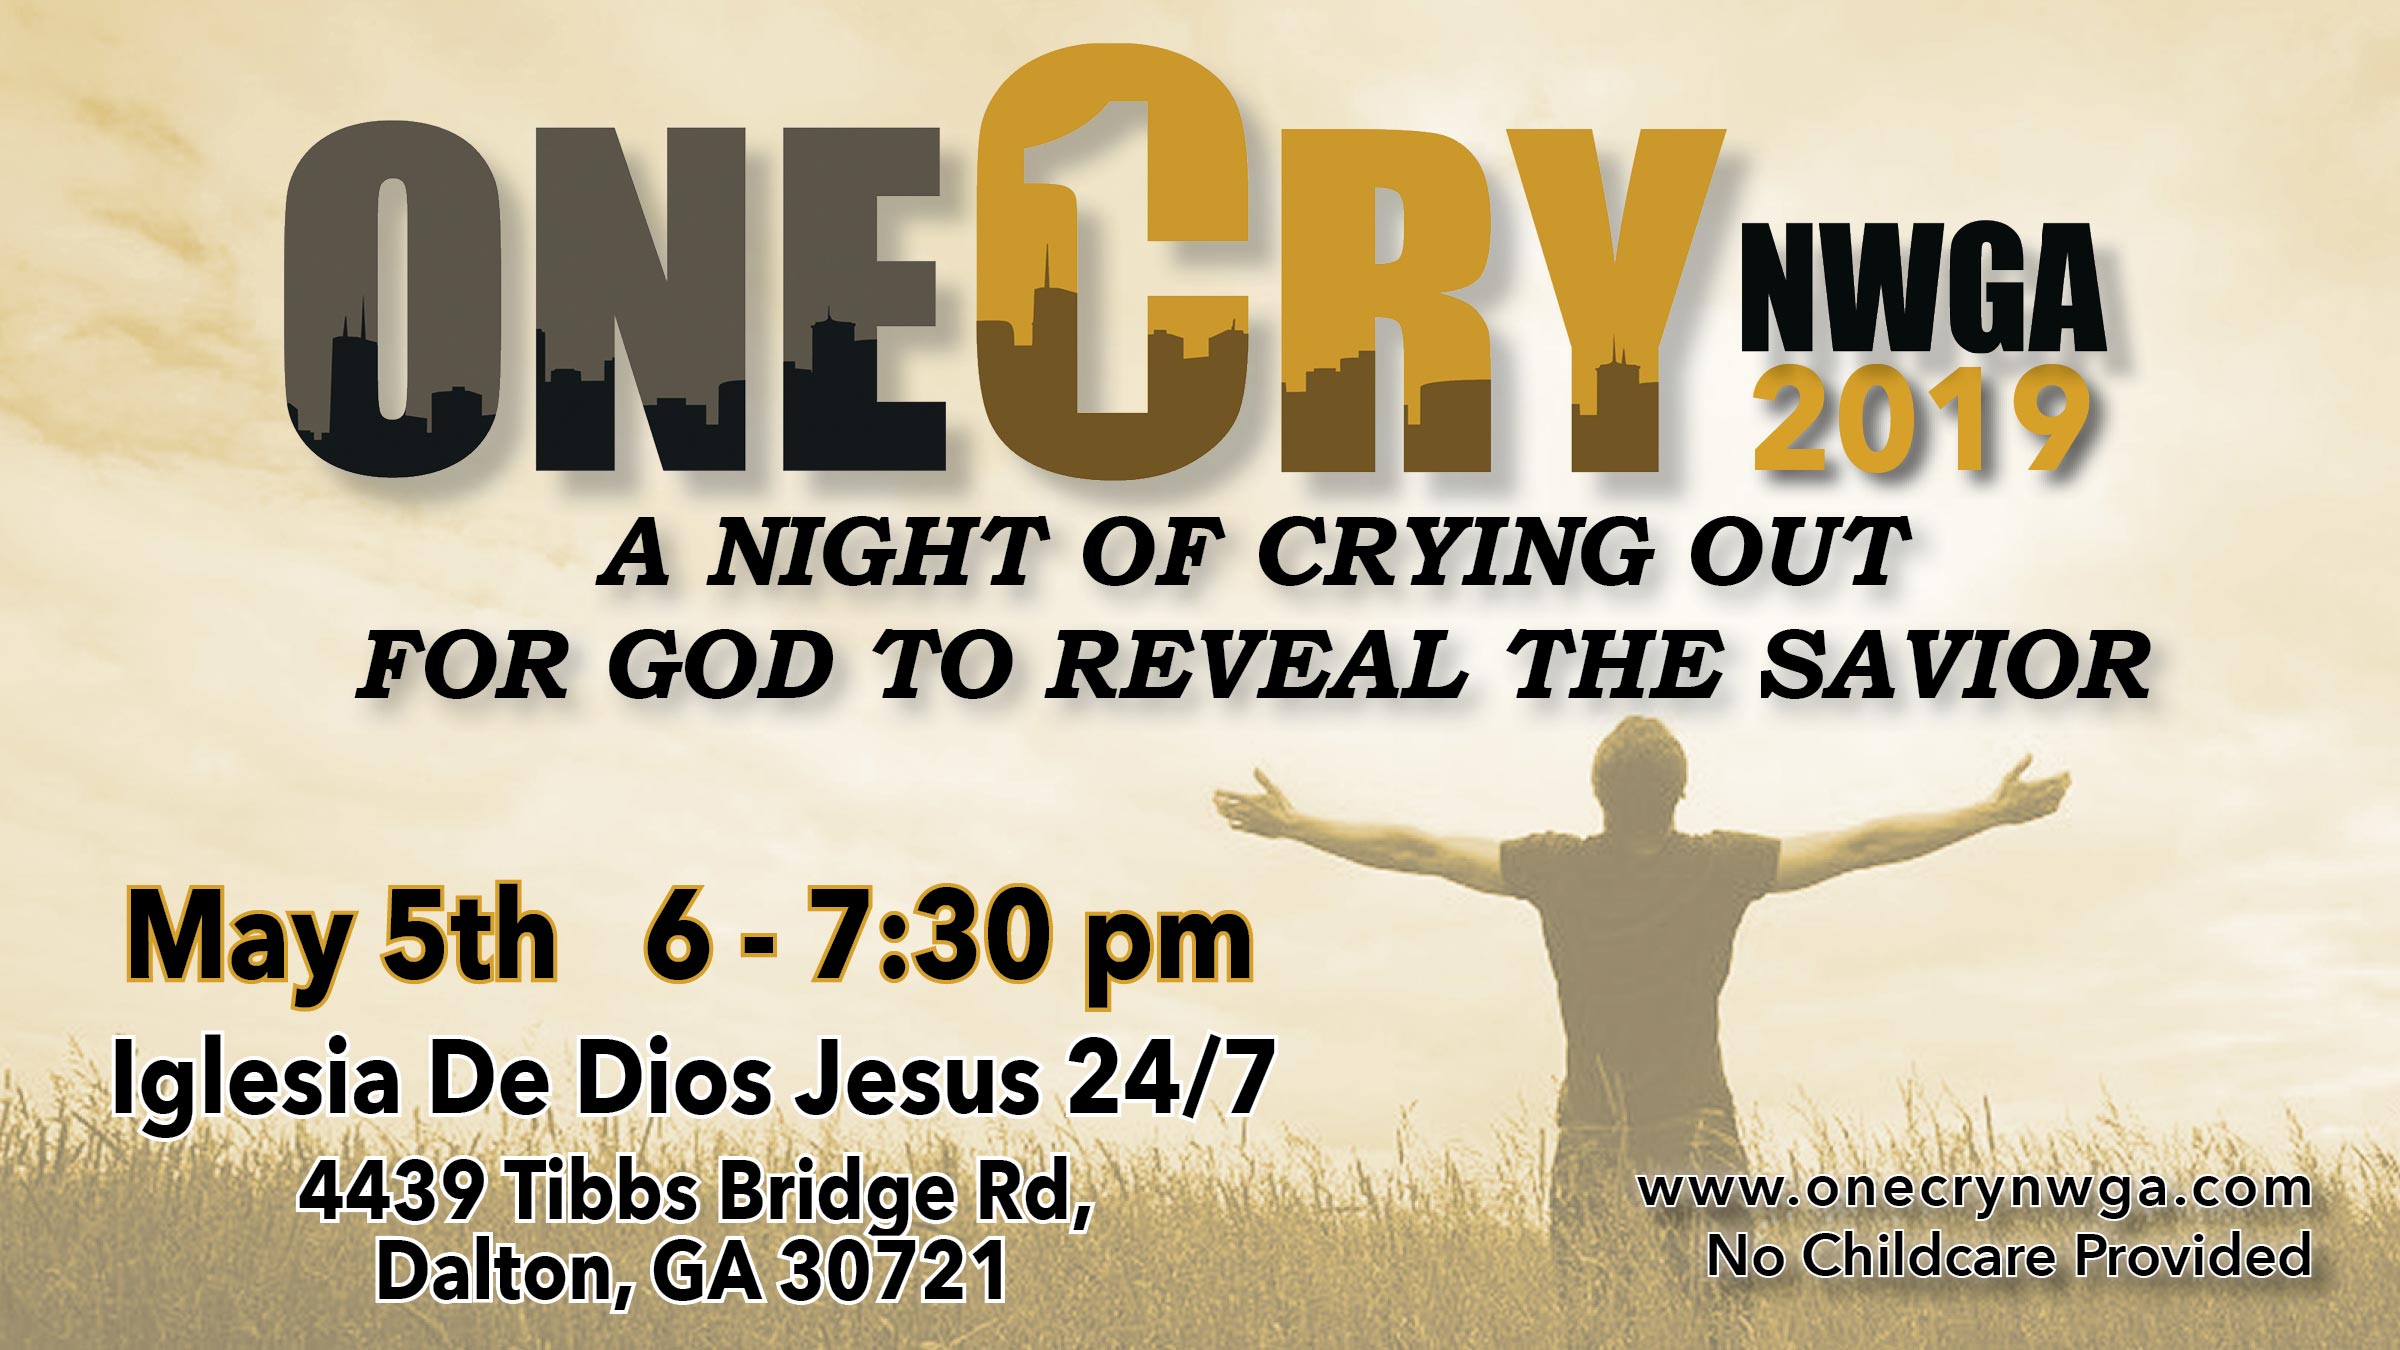 OneCry NWGA Revival 2019 | A Night of Crying Out to God to Reveal the Savior | May 5, 2019 @ 6:00 PM | Iglesia de Dios Jesus 24/7, 4439 Tibbs Bridge Rd., Dalton, GA 30721 | No Childcare Provided